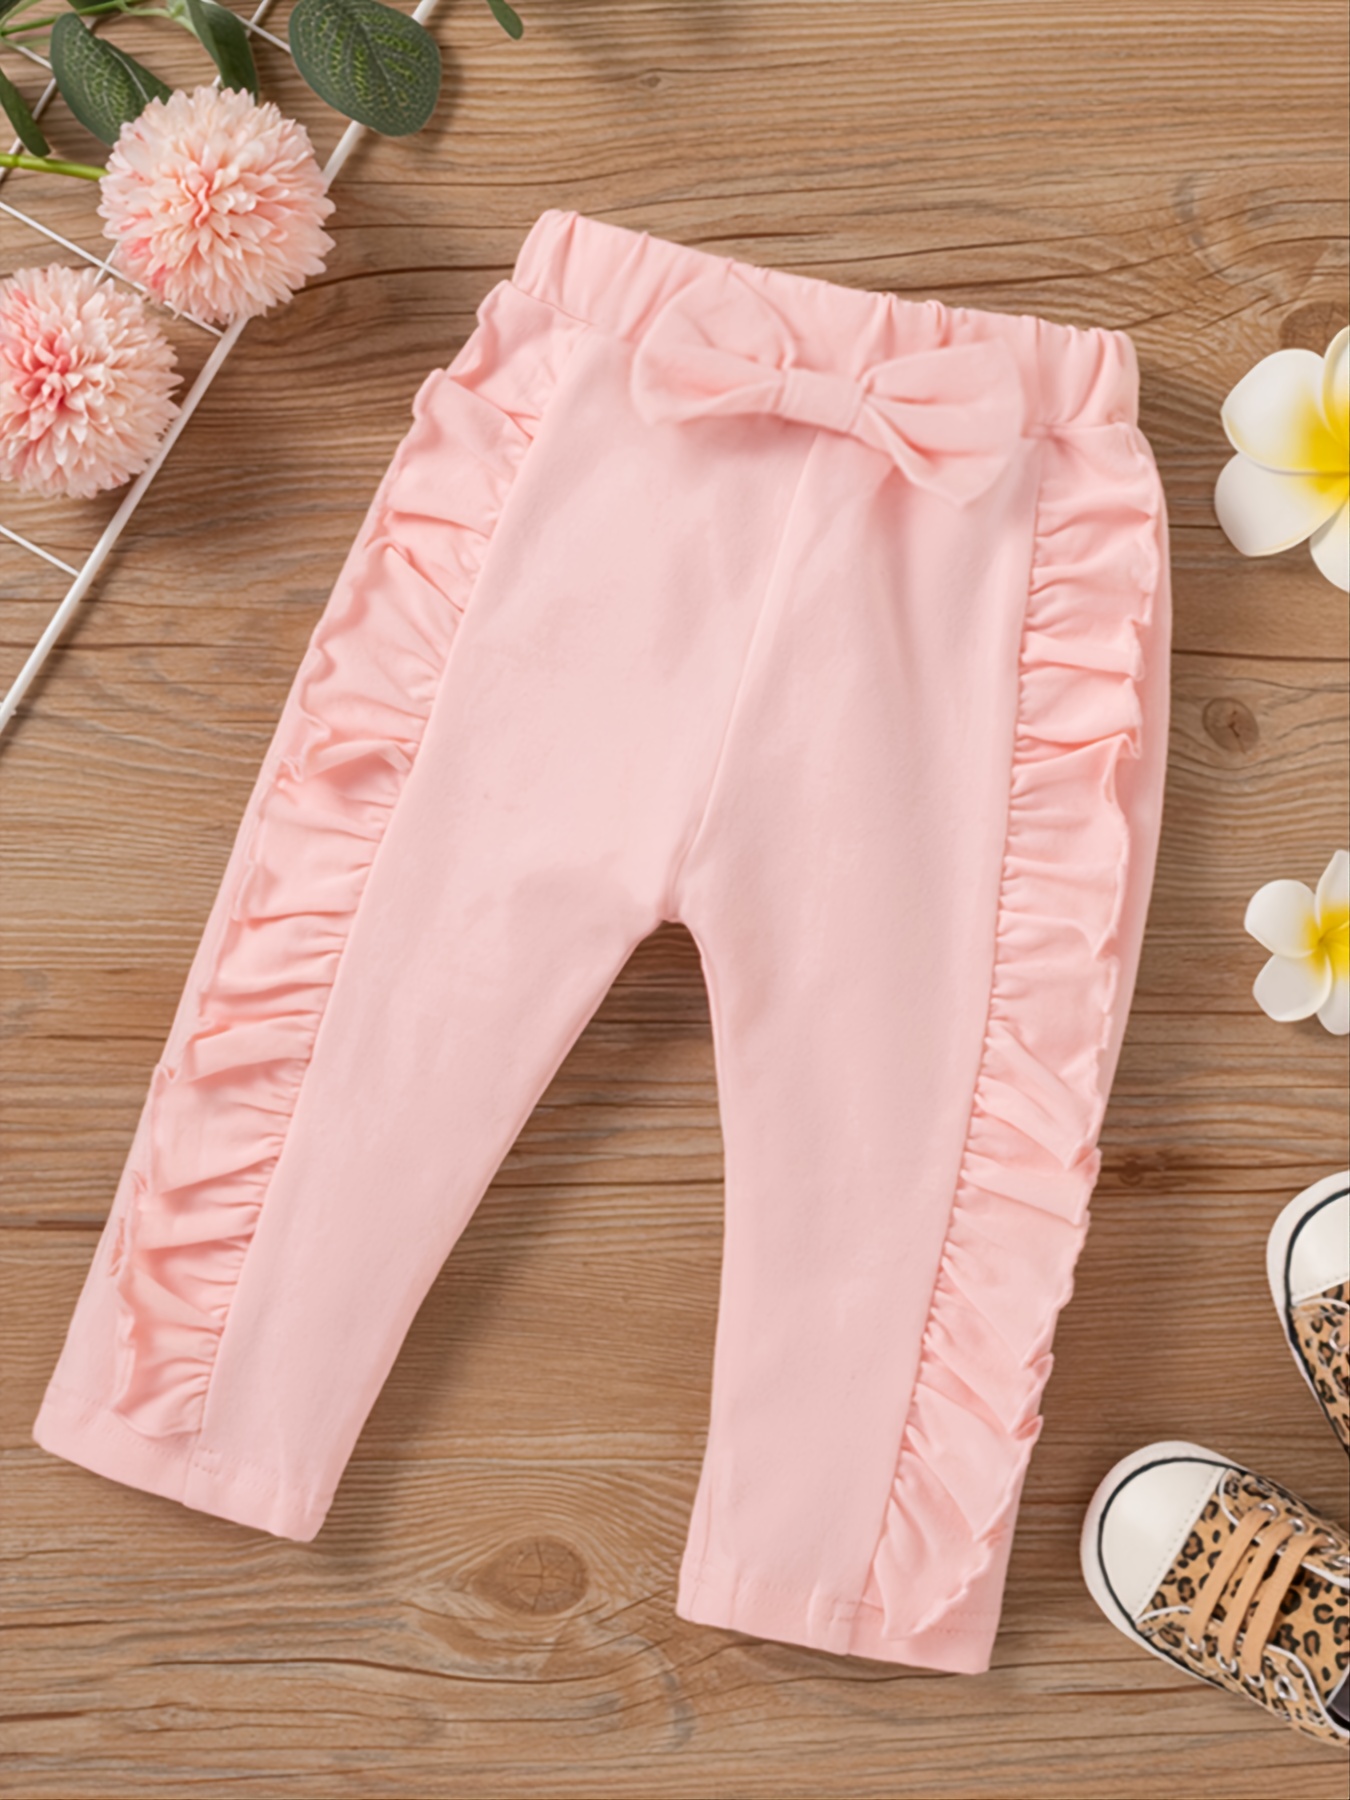 Baby Girls Pink Cotton Frilly Pants